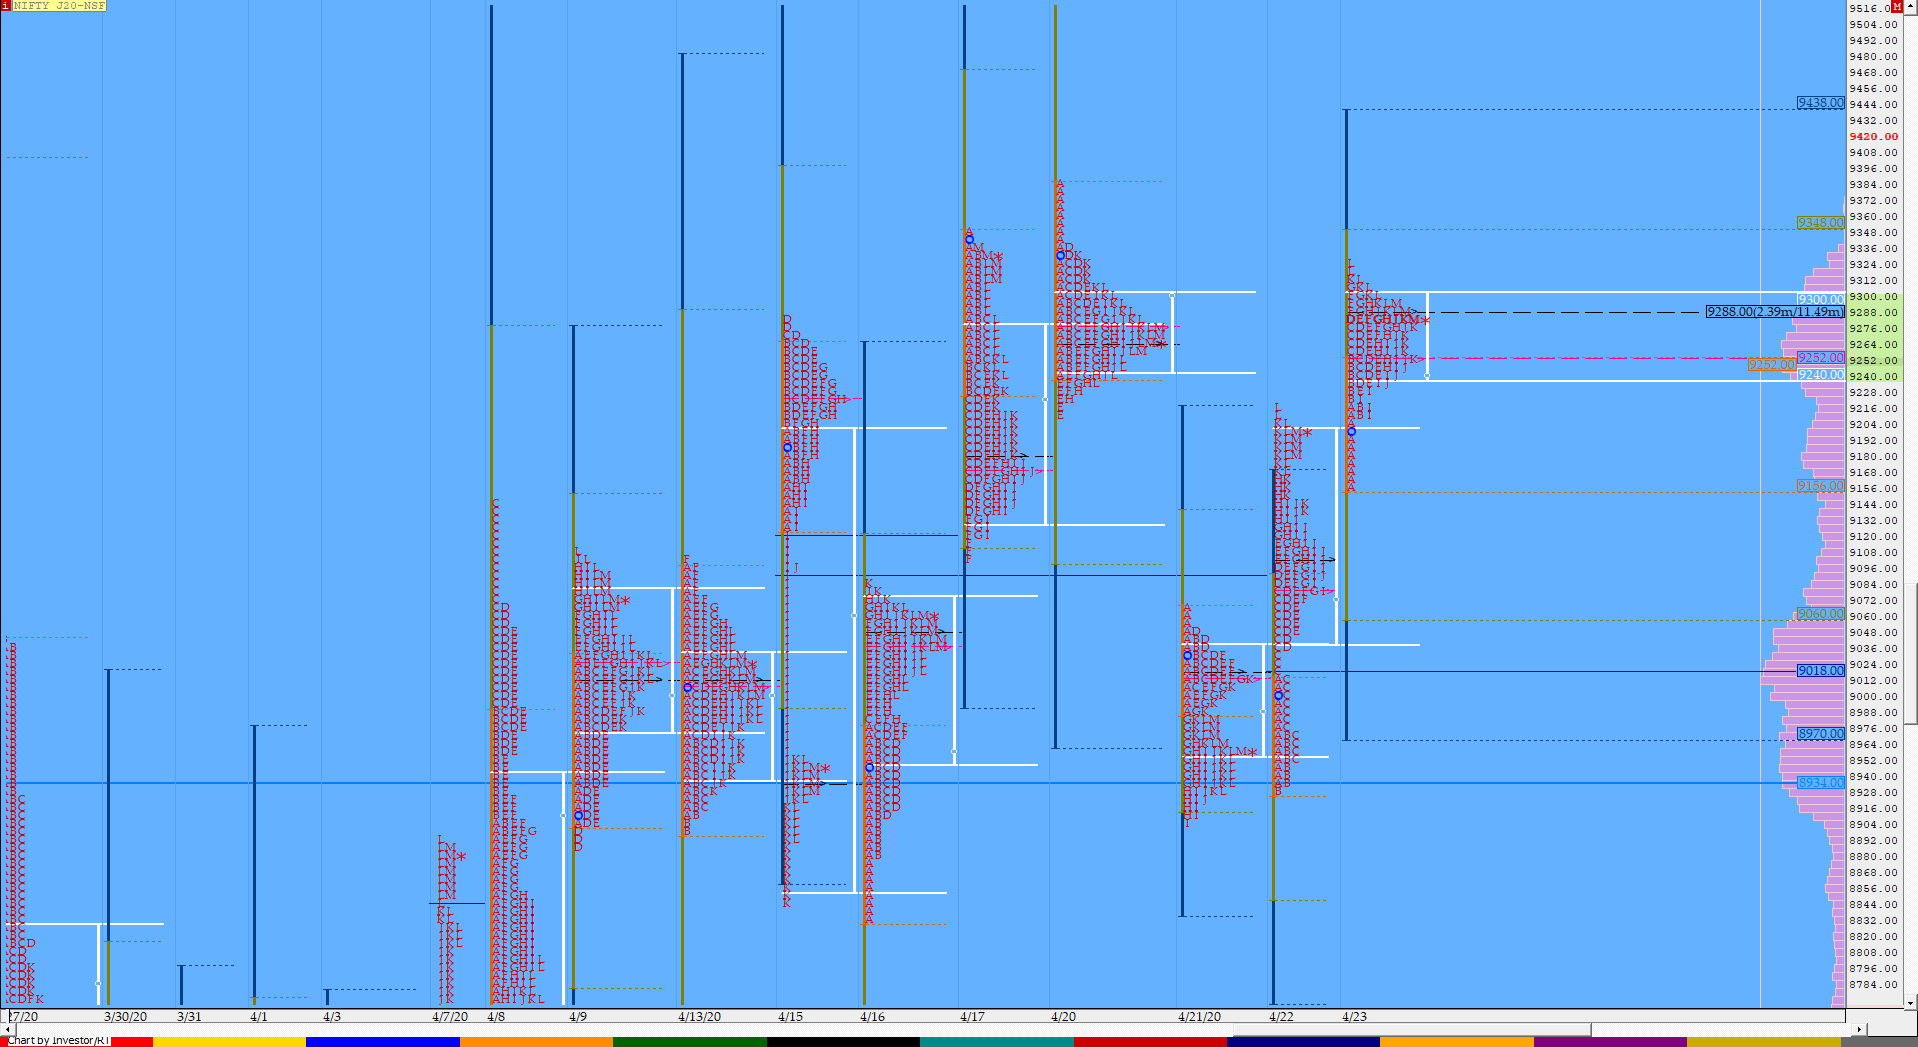 Nf Compo1 14 Market Profile Analysis Dated 23Rd Apr 2020 Banknifty Futures, Charts, Day Trading, Intraday Trading, Intraday Trading Strategies, Market Profile, Market Profile Trading Strategies, Nifty Futures, Order Flow Analysis, Support And Resistance, Technical Analysis, Trading Strategies, Volume Profile Trading